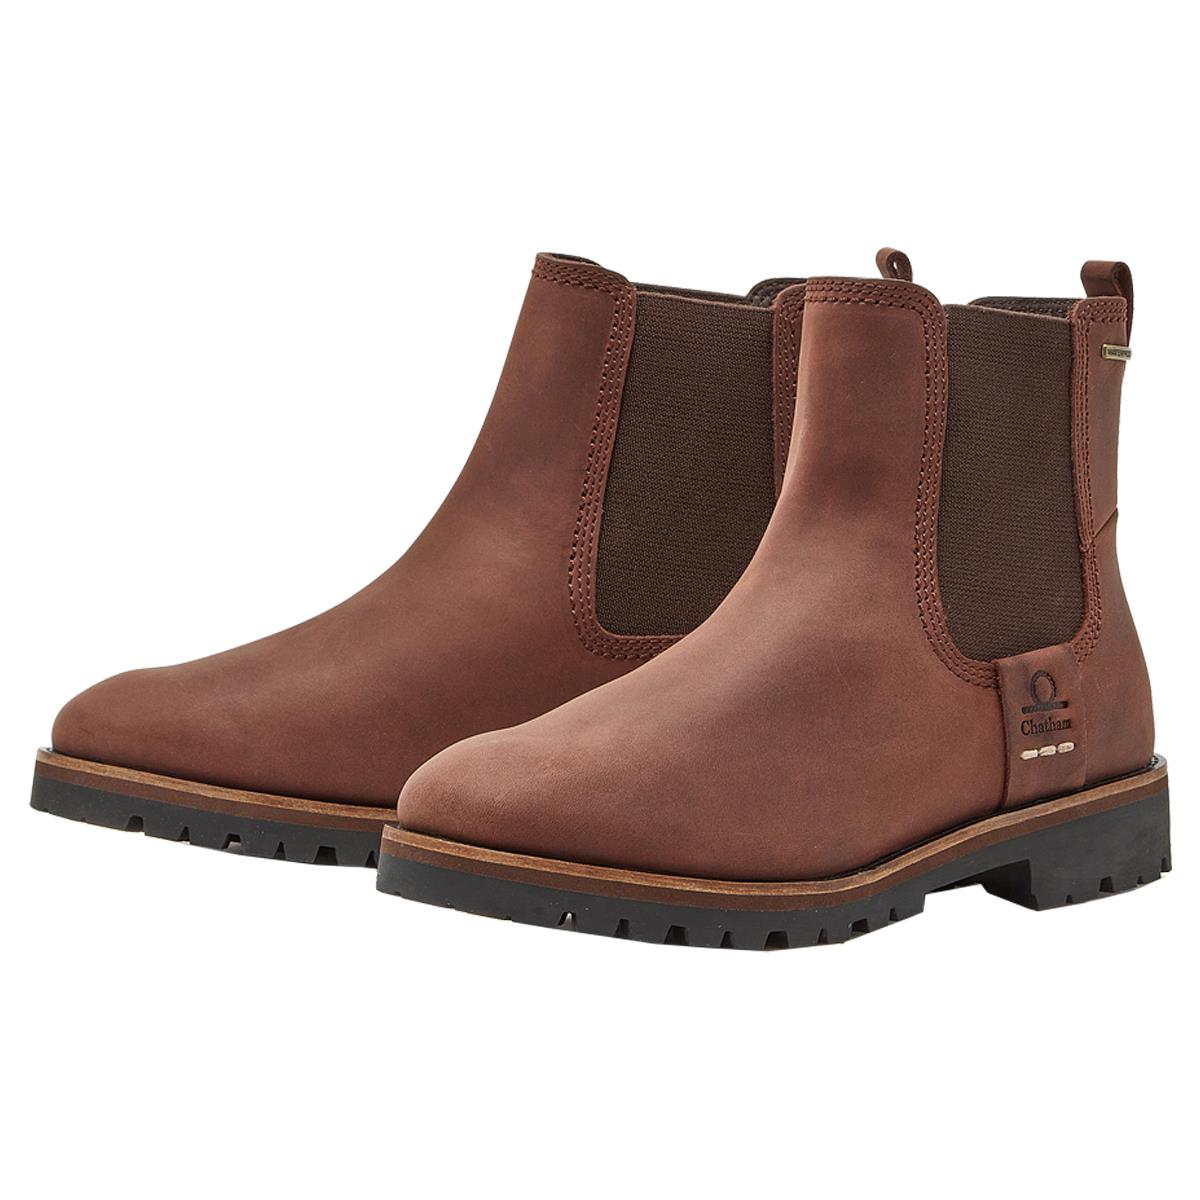 Chatham Womens Olympia Chelsea Boots Questions & Answers